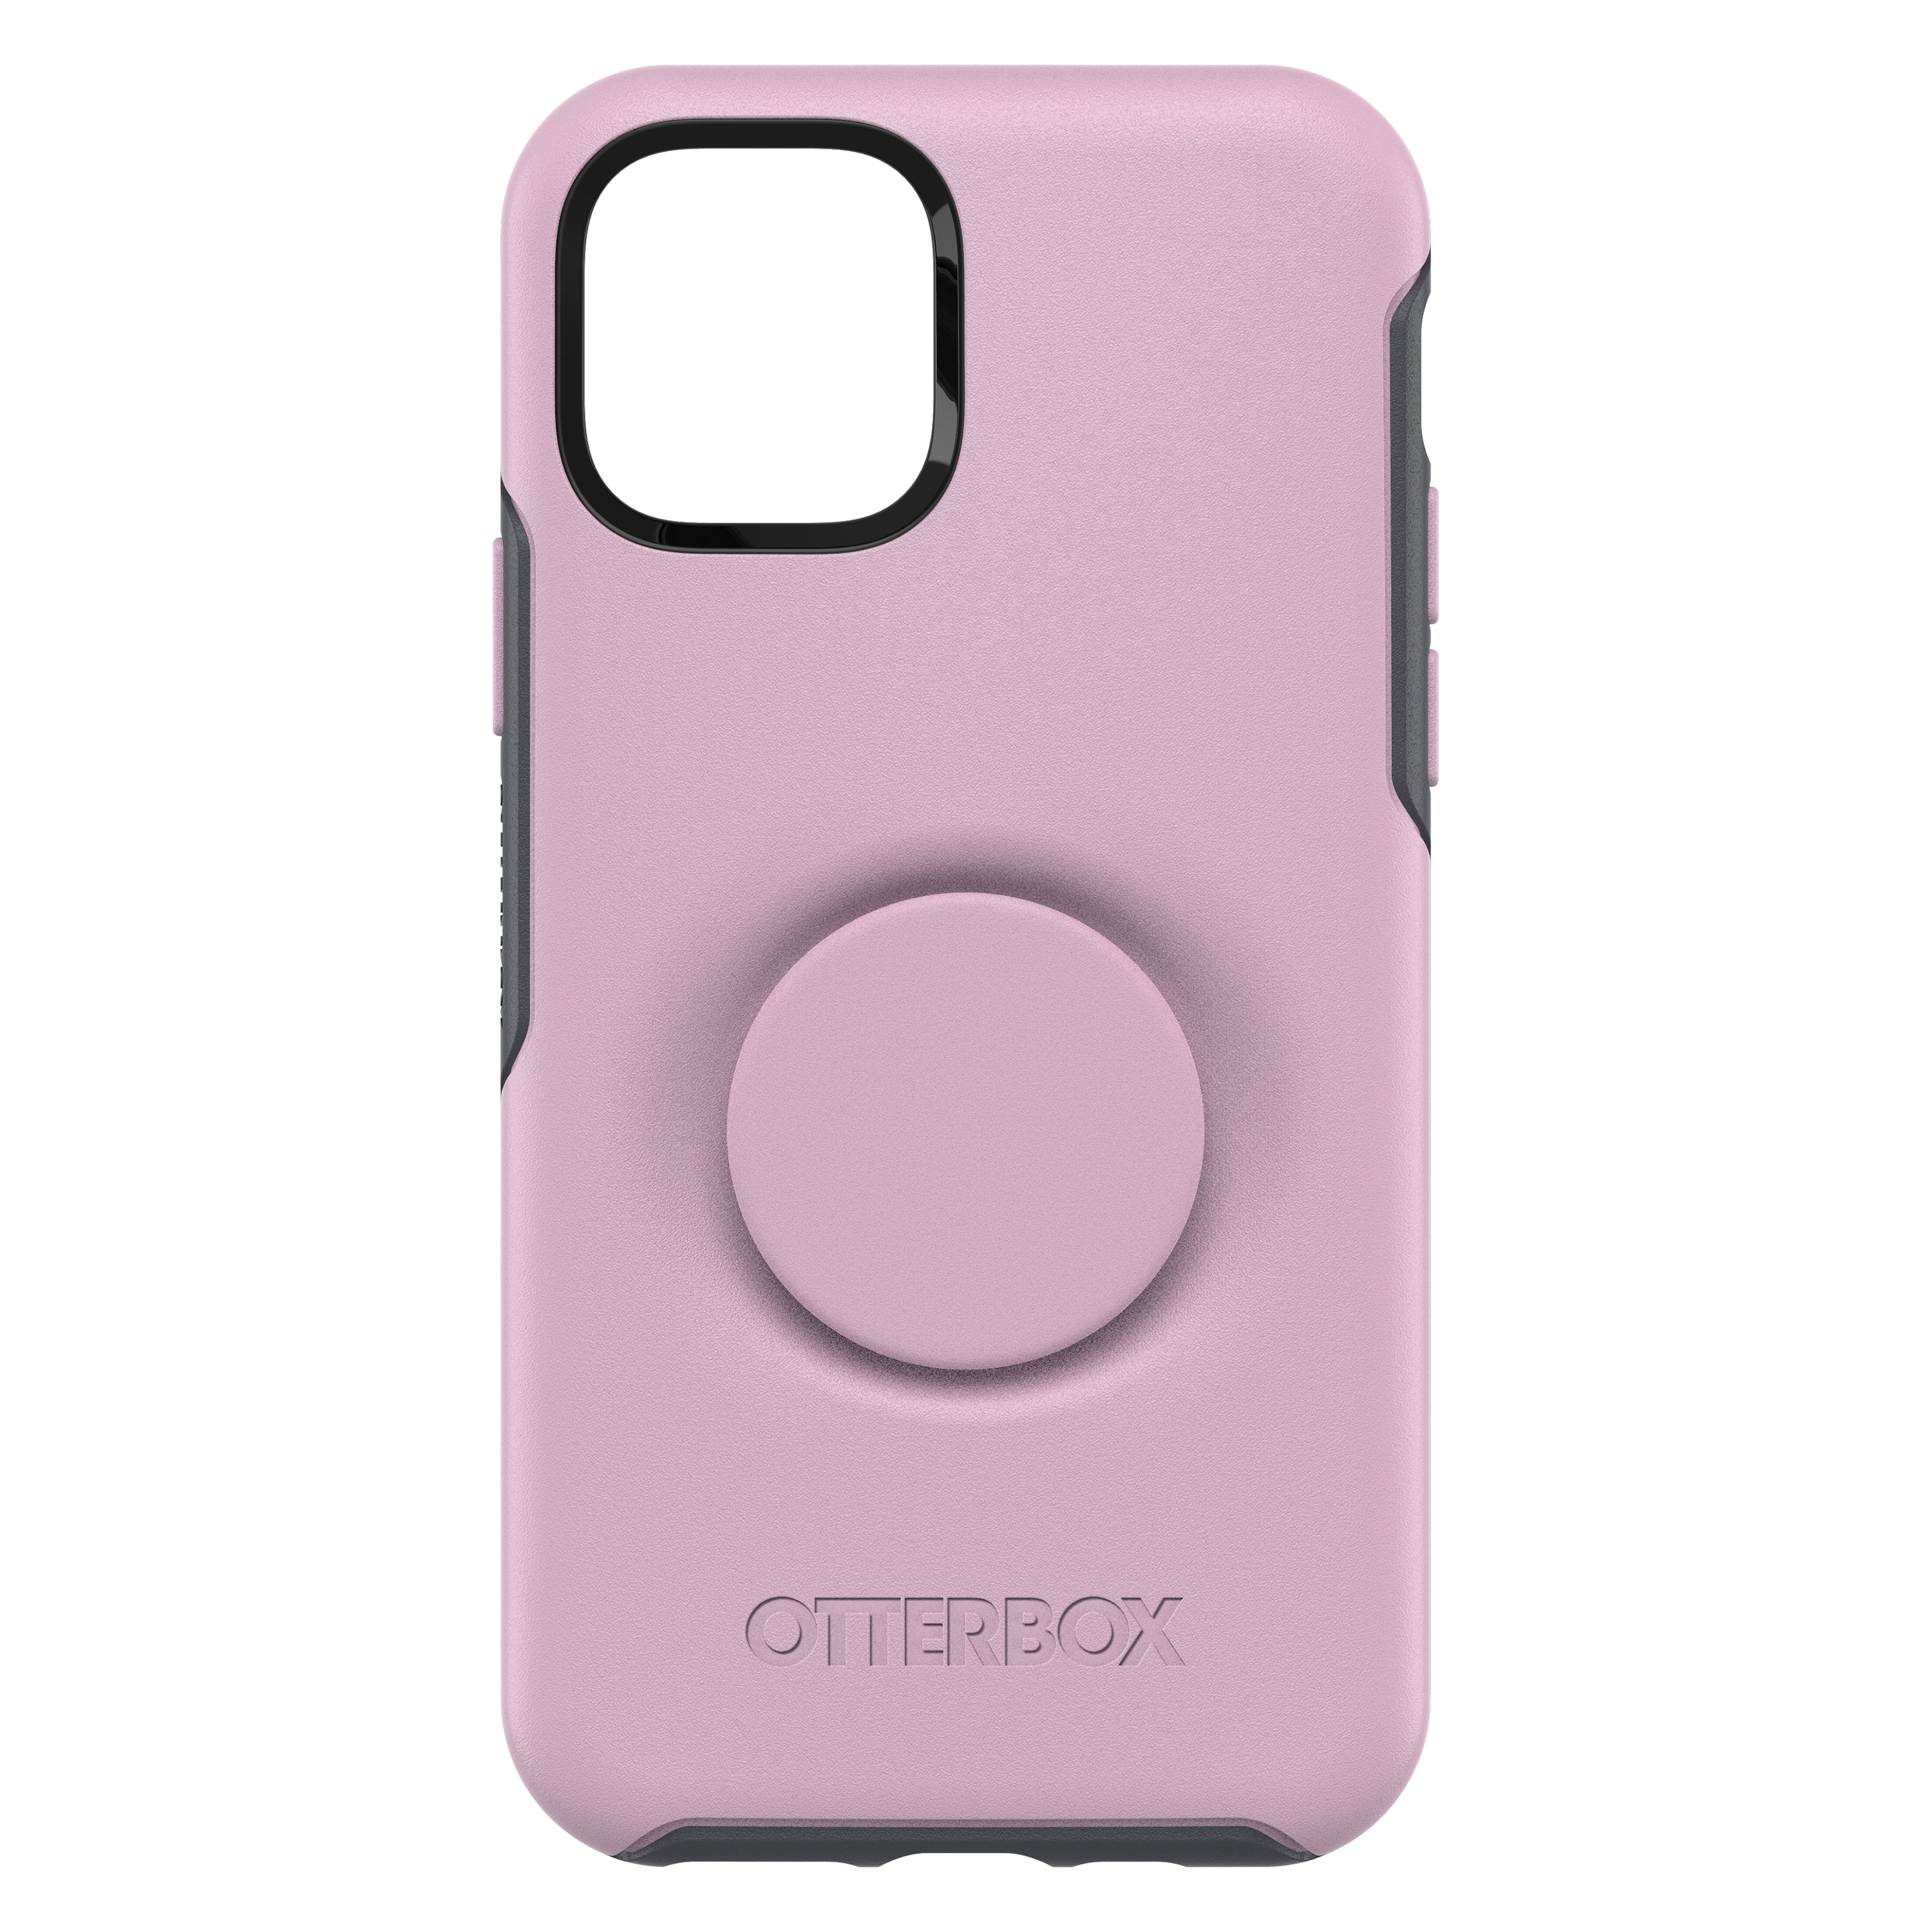 iPhone 11 Backcover, Pro, Symmetry, Apple, Rosa OTTERBOX